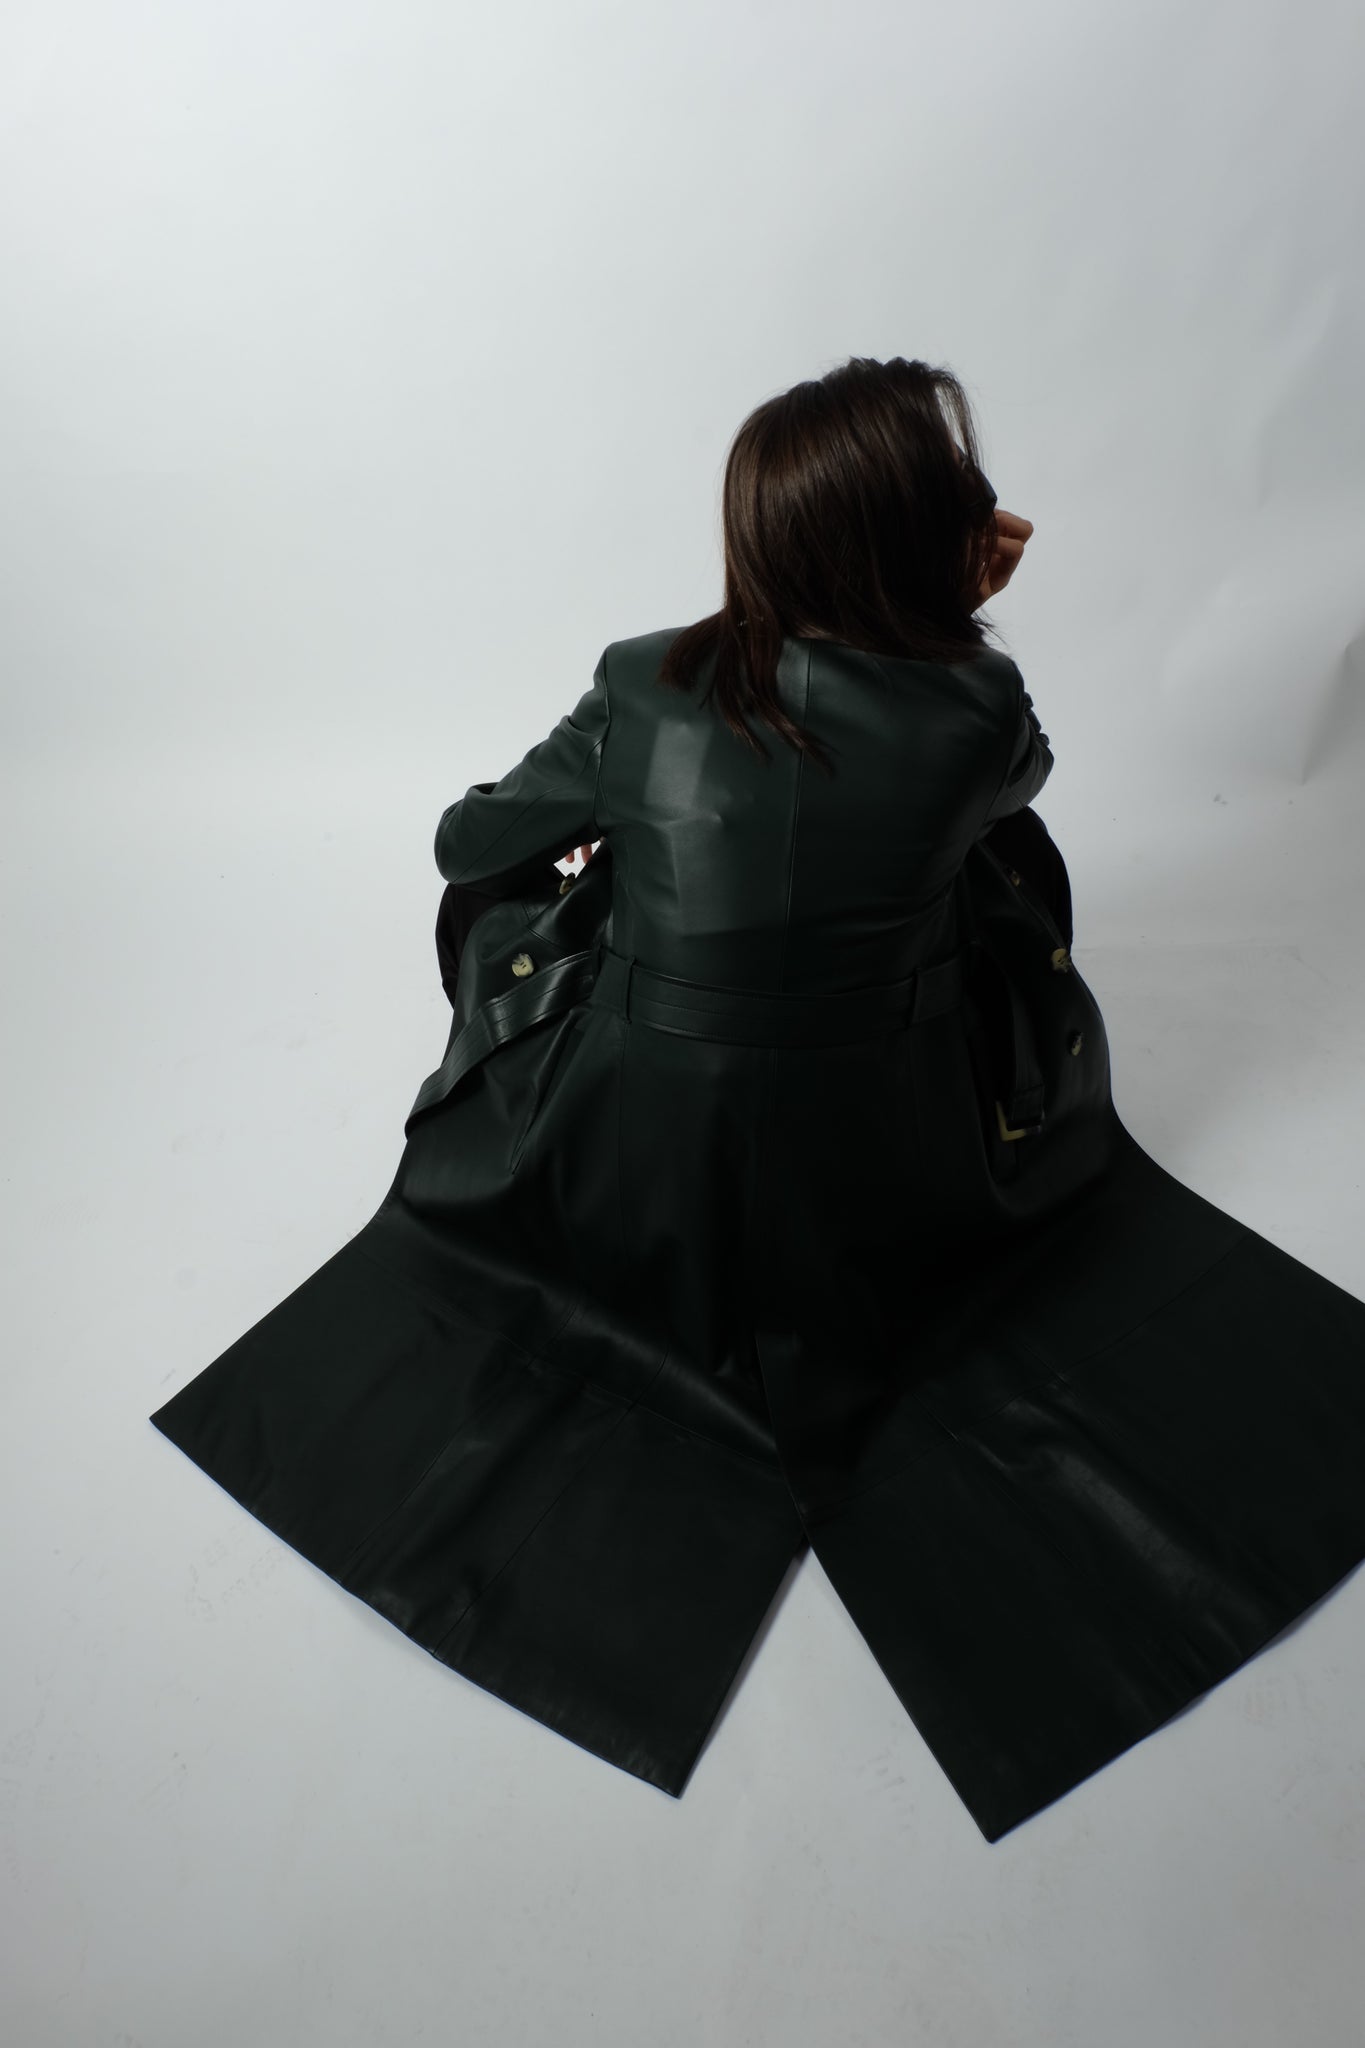 CHROME FREE LEATHER COAT IN MOSS GREEN